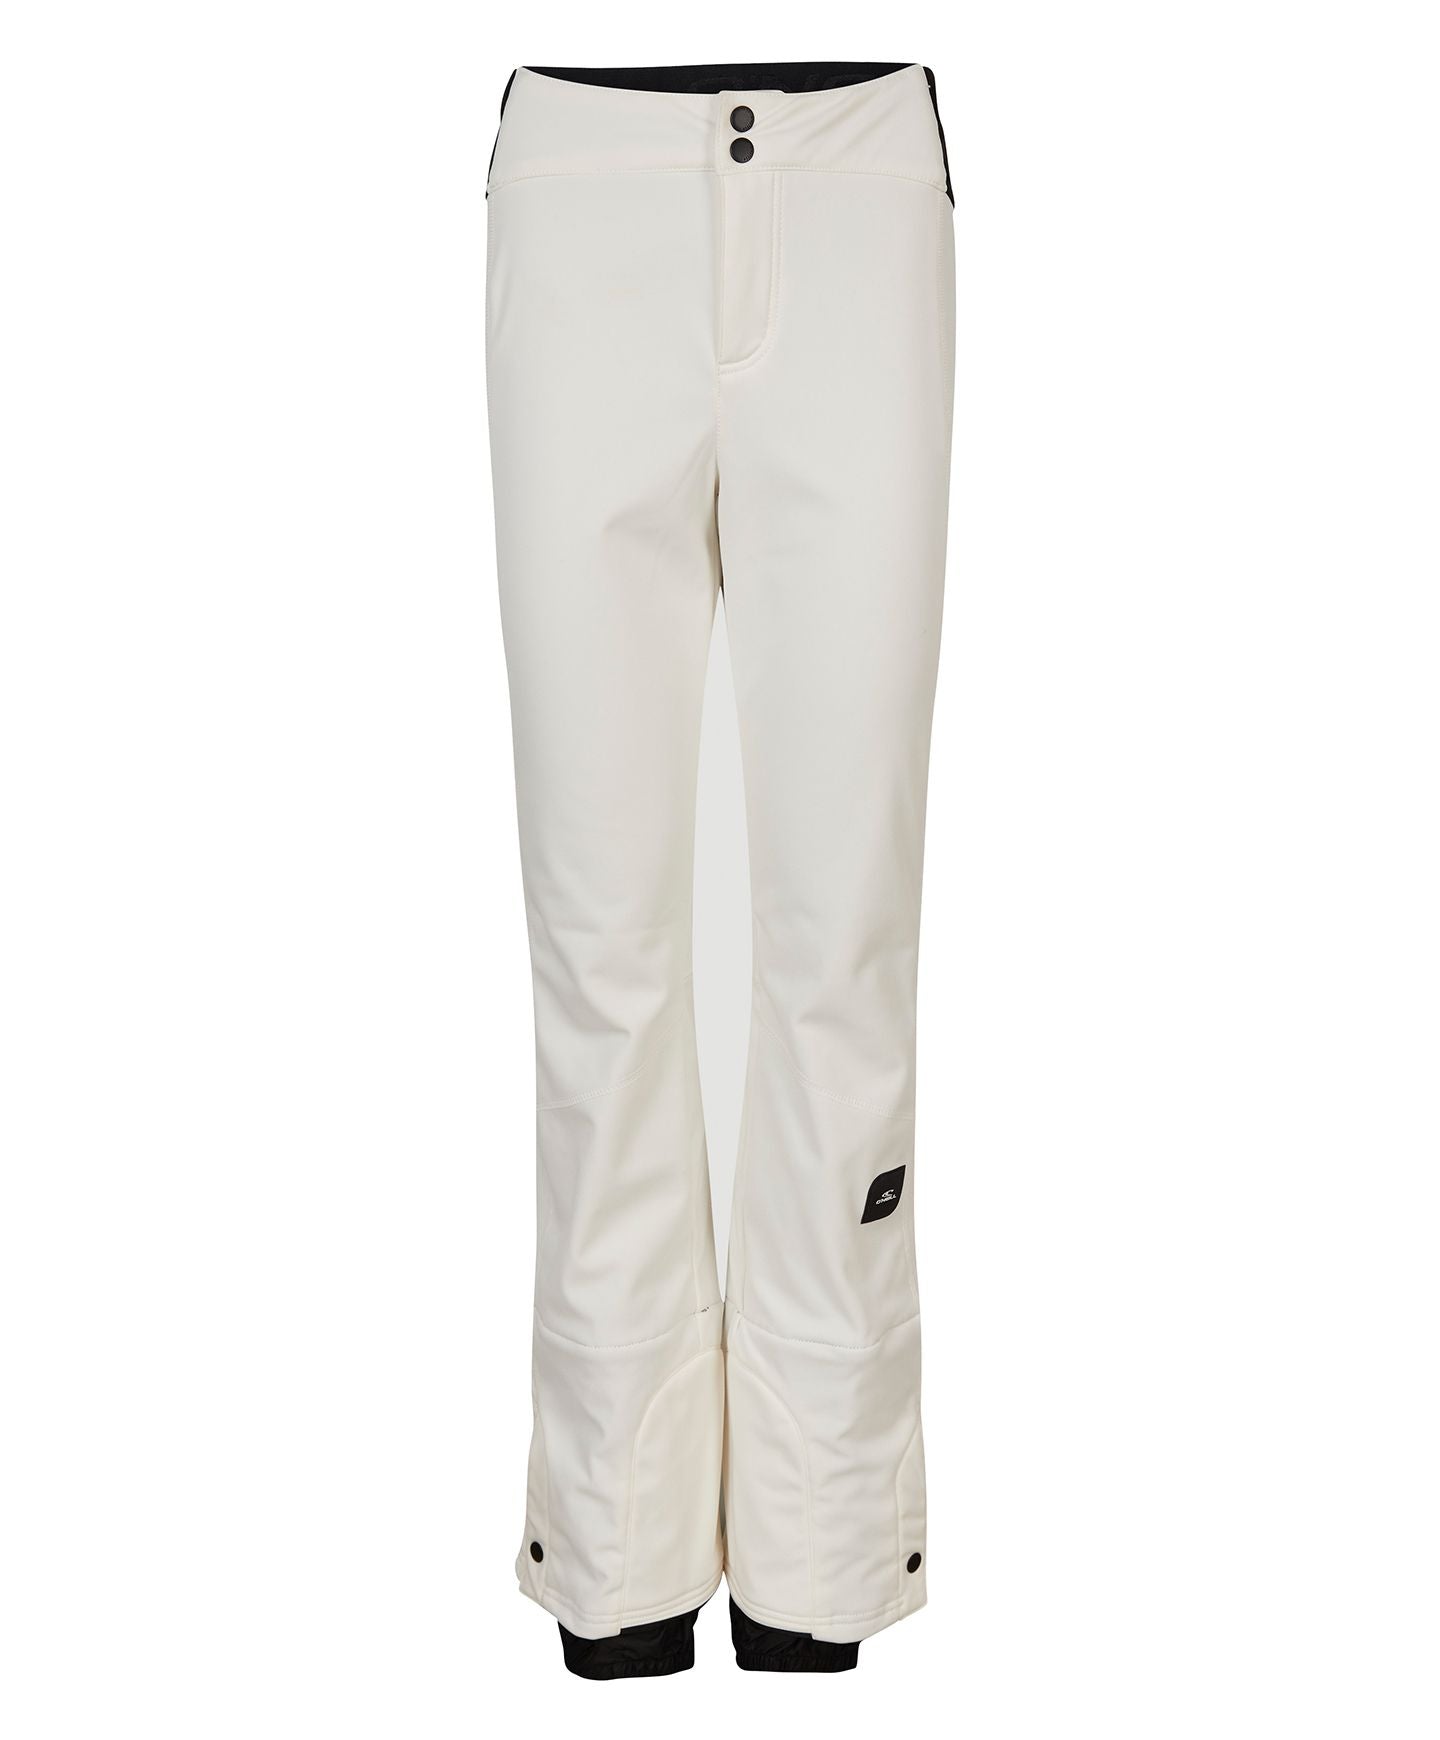 Buy Womens Blessed Snow Pants - Snow White by ONeill online